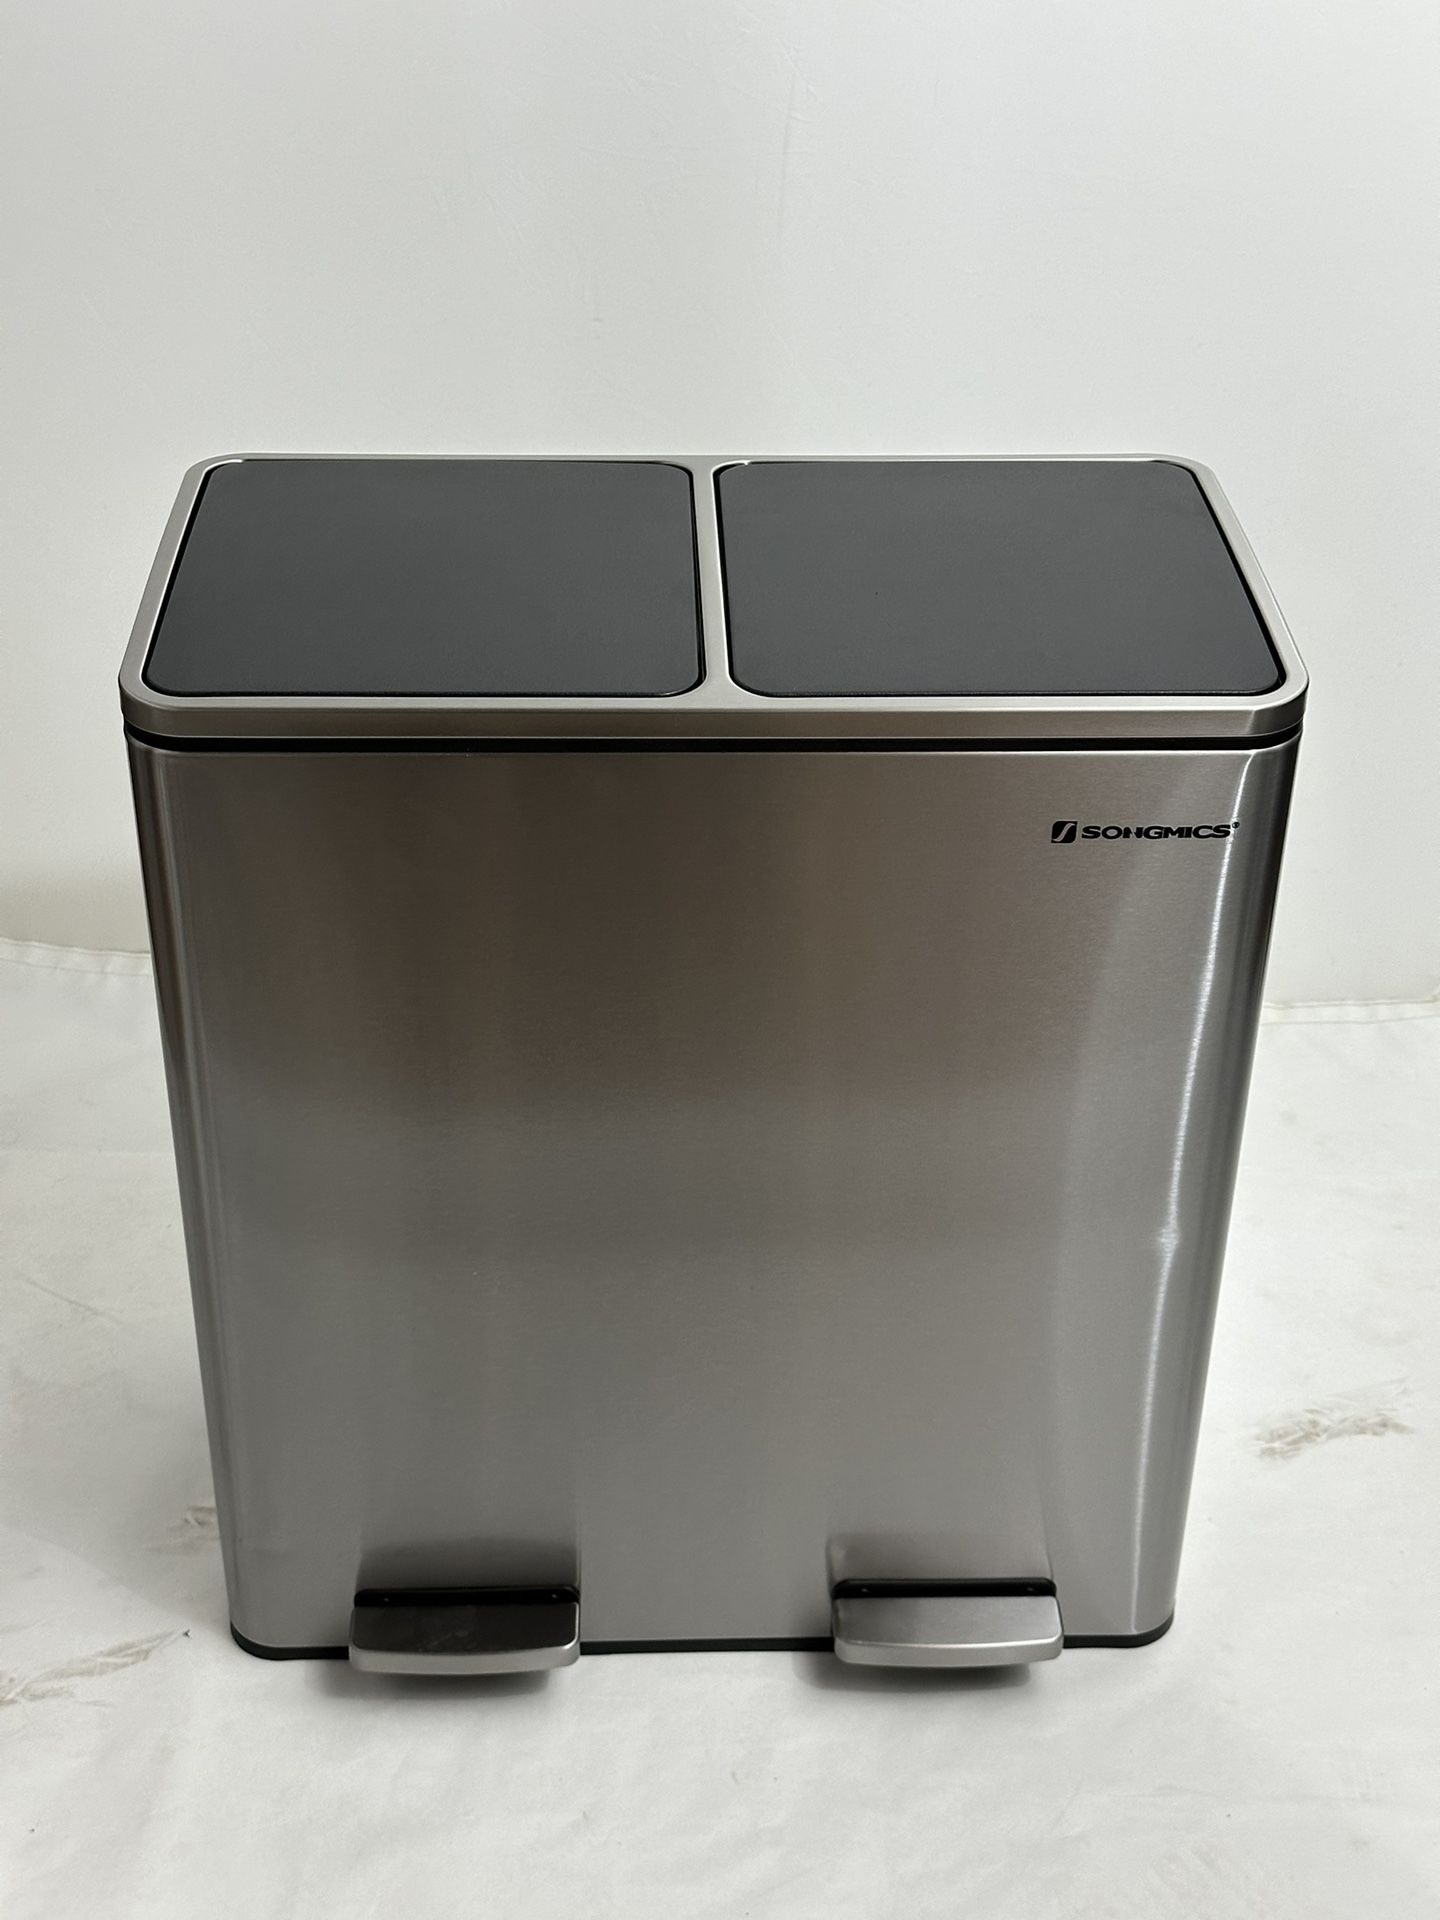 SONGMICS Trash Can, 2 x 8-Gallon Garbage Can for Kitchen, with 15